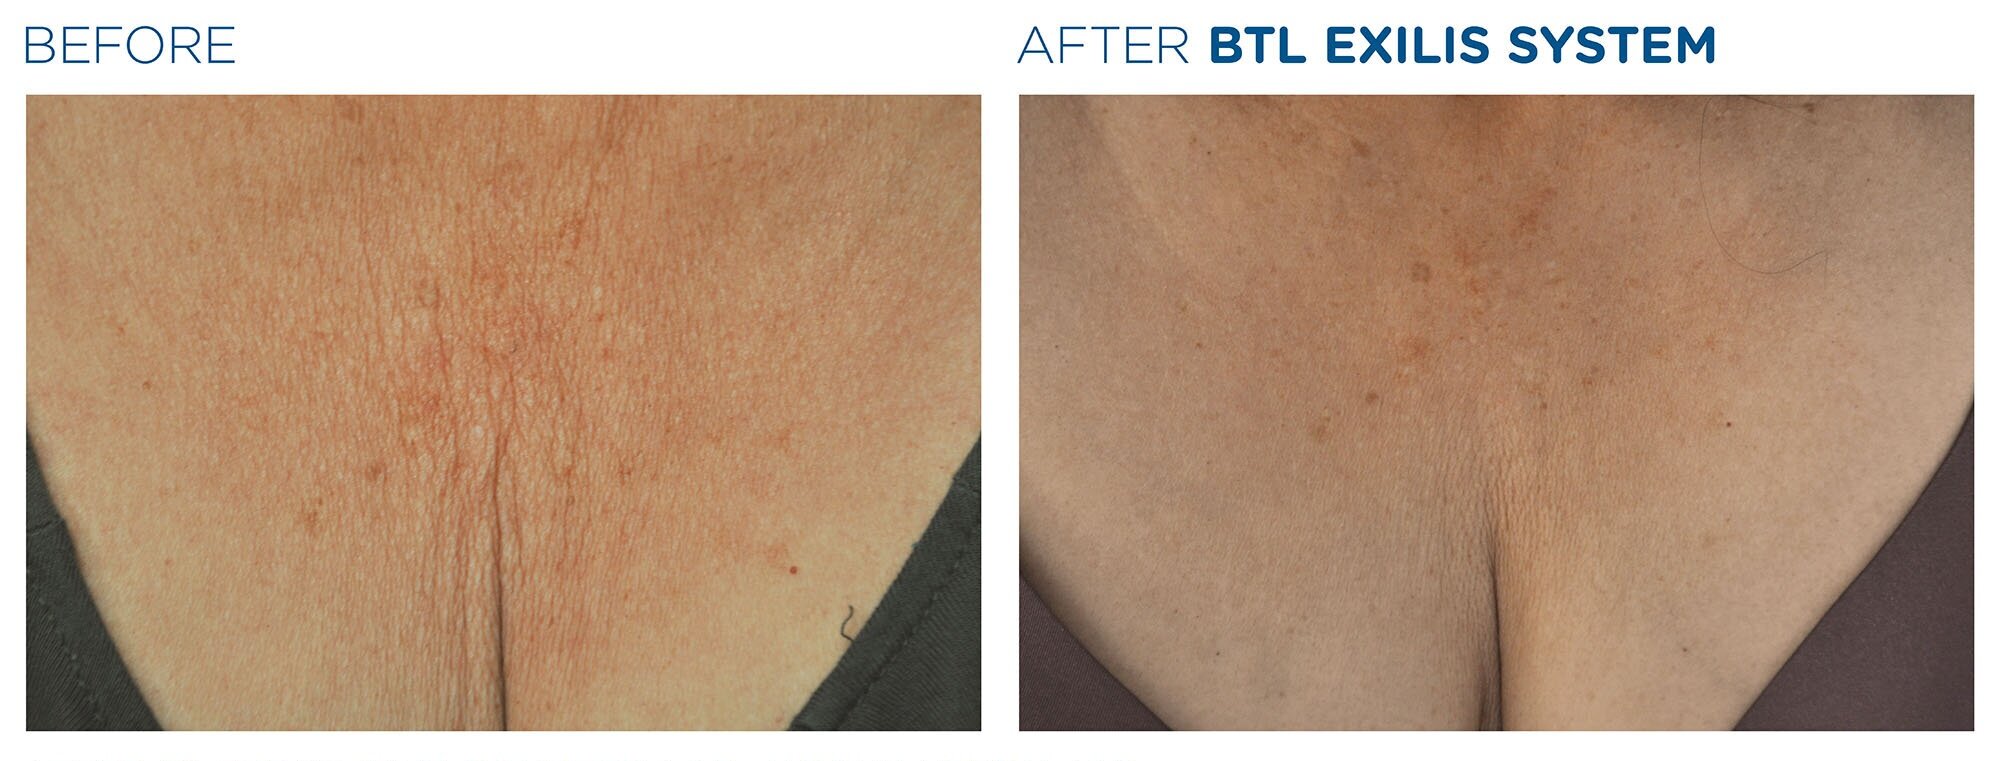 Before EXILIS | After EXILIS Skin Tightening Treatment on Chest